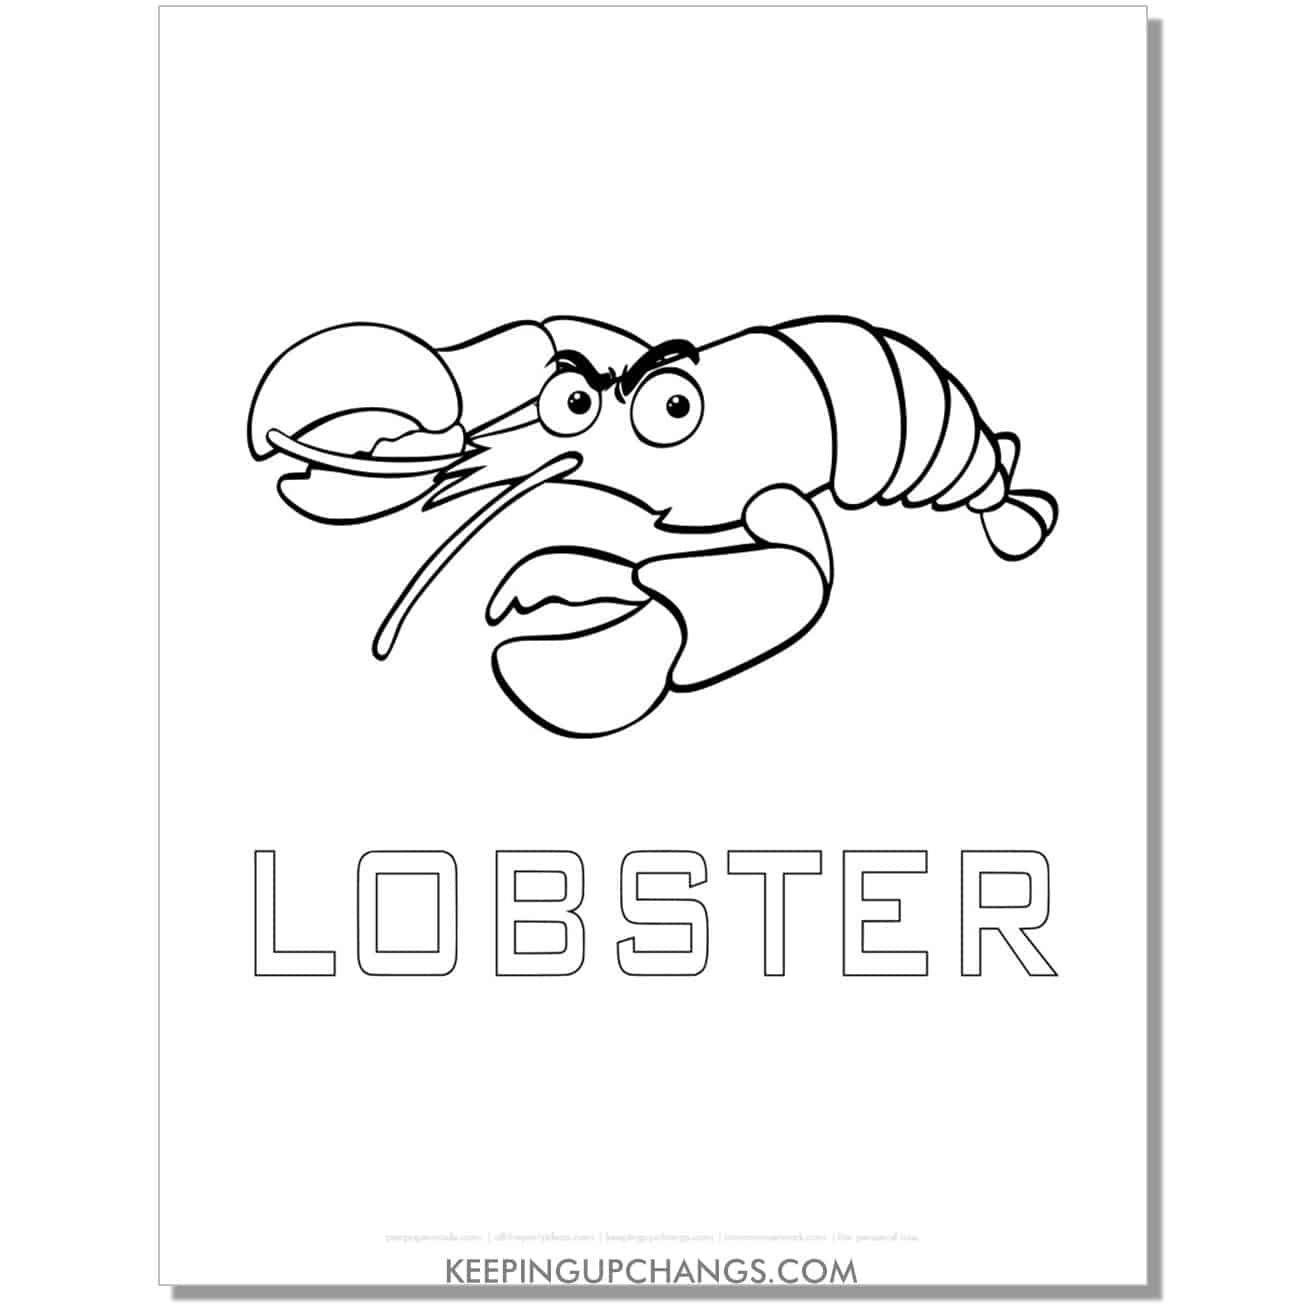 free lobster with word coloring page, sheet.